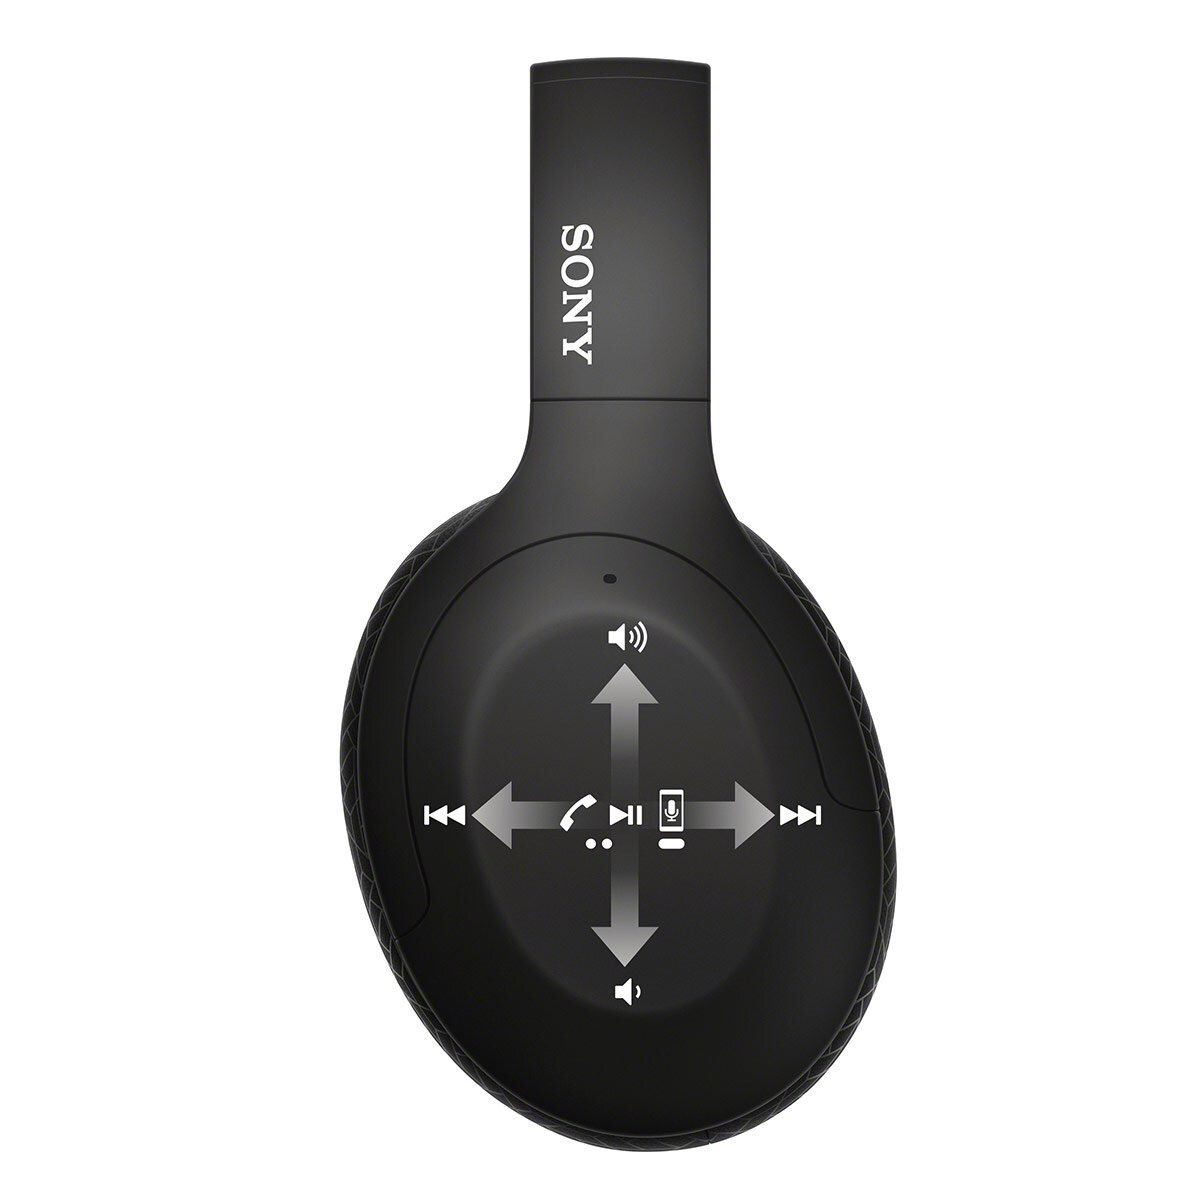 Buy Sony WHH910NB Noise Cancelling Wireless Headphones in Black at Costco.co.uk